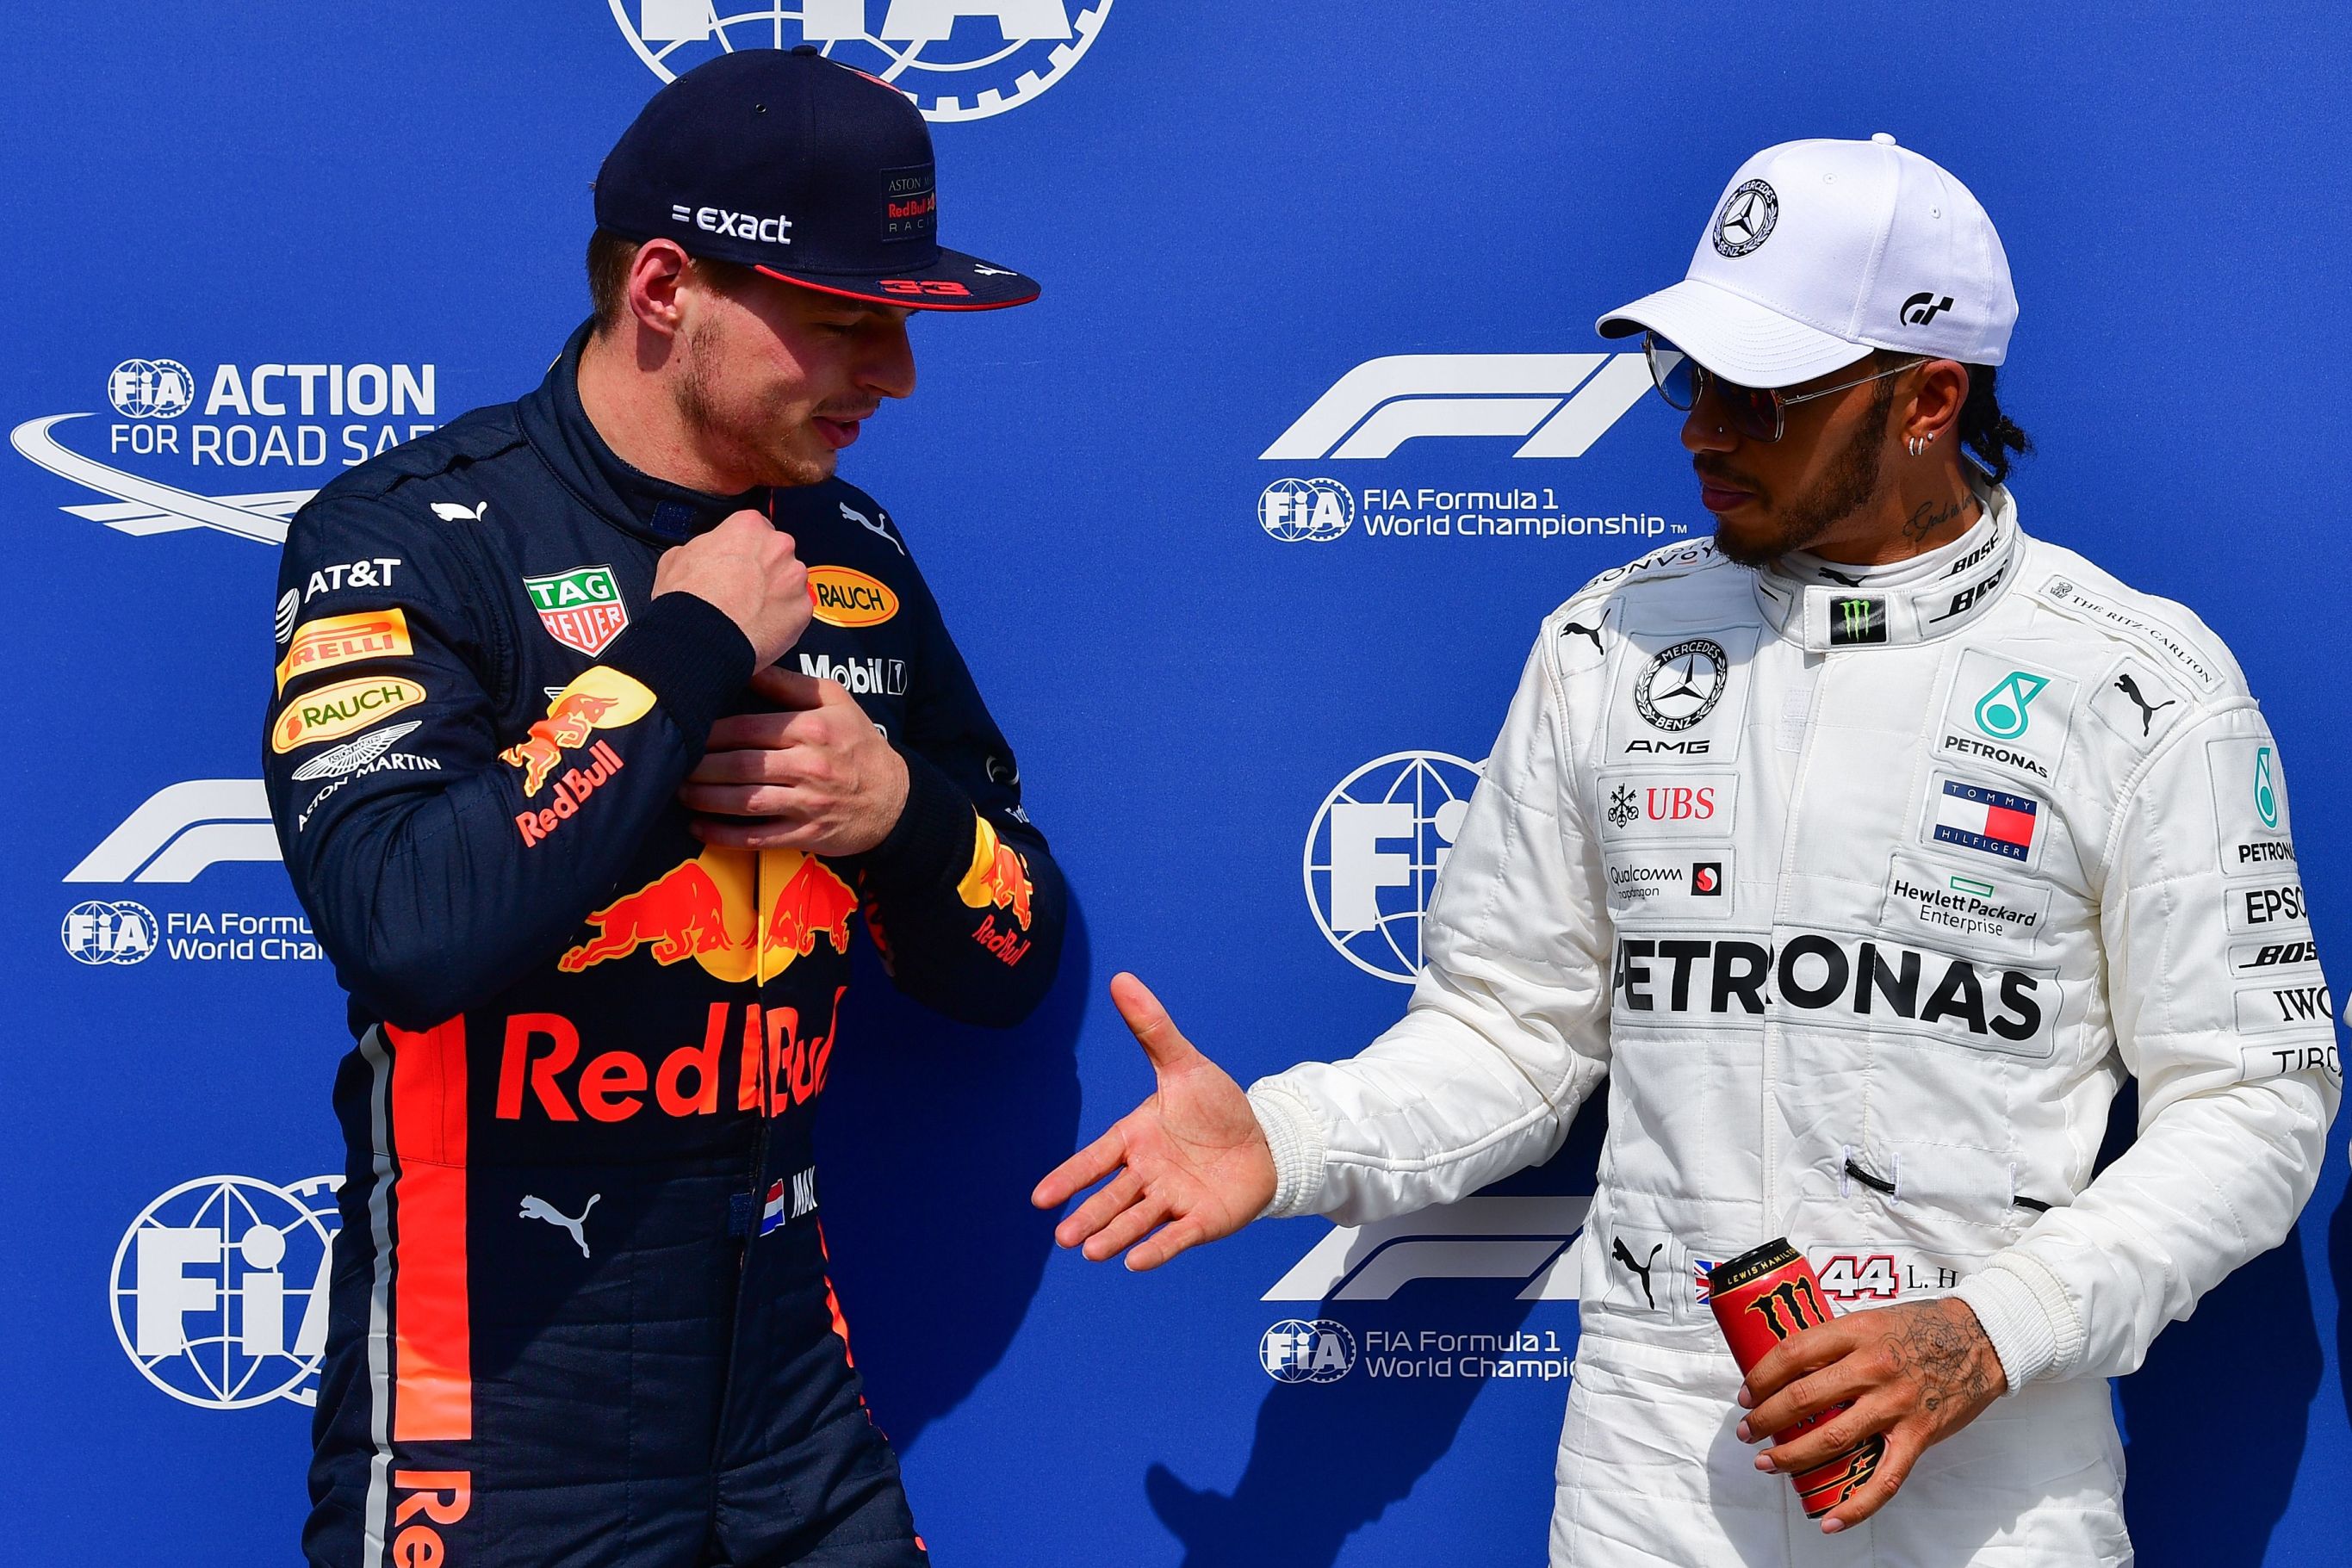 Max Verstappen and Lewis Hamilton shaking hands after the last race of the 2019 season.